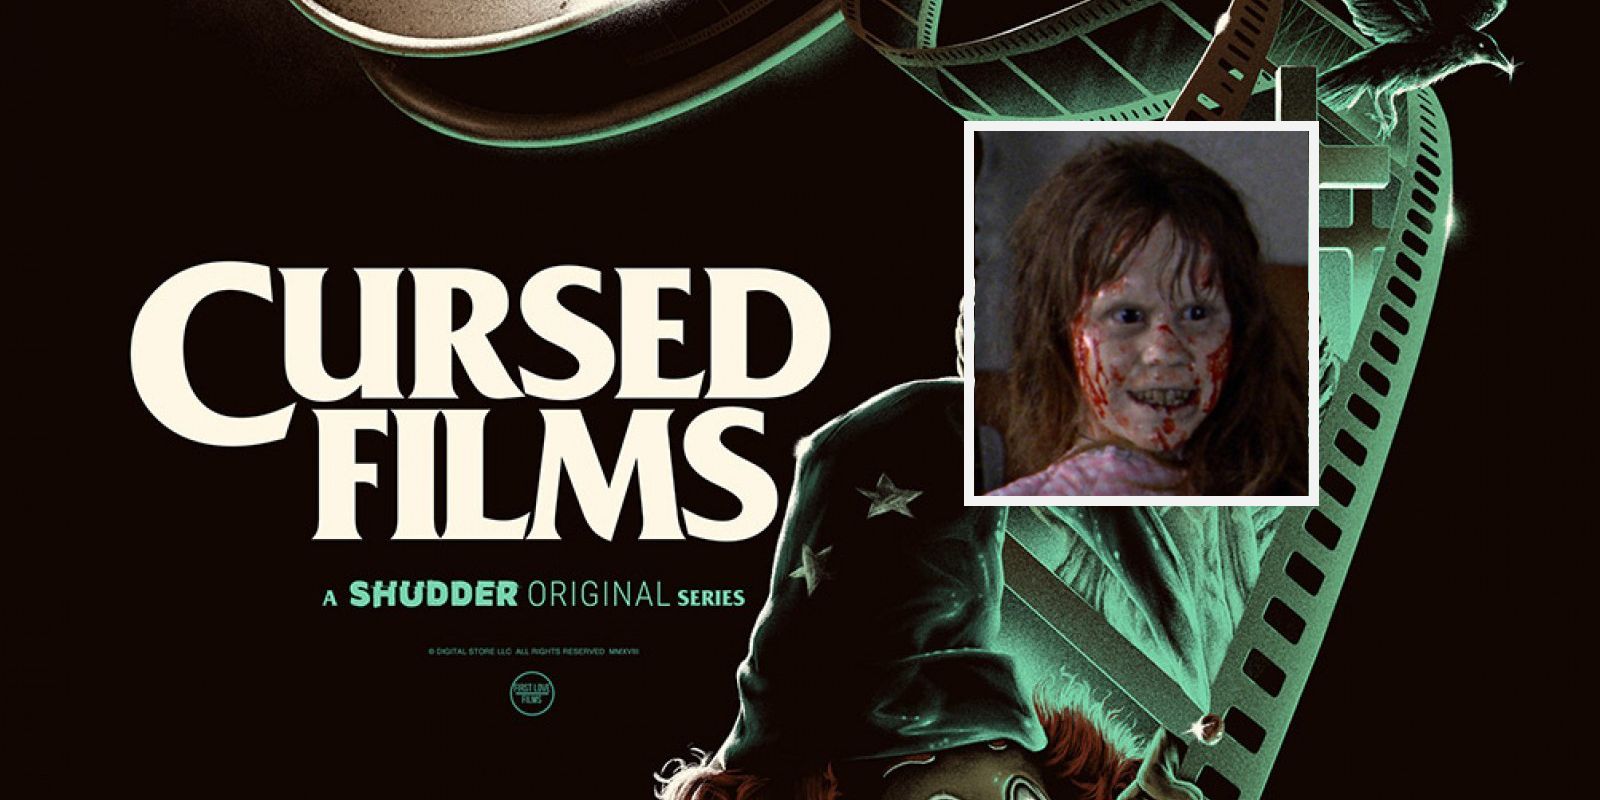 Shudder's Cursed Films banner with Regan from The Exorcist.